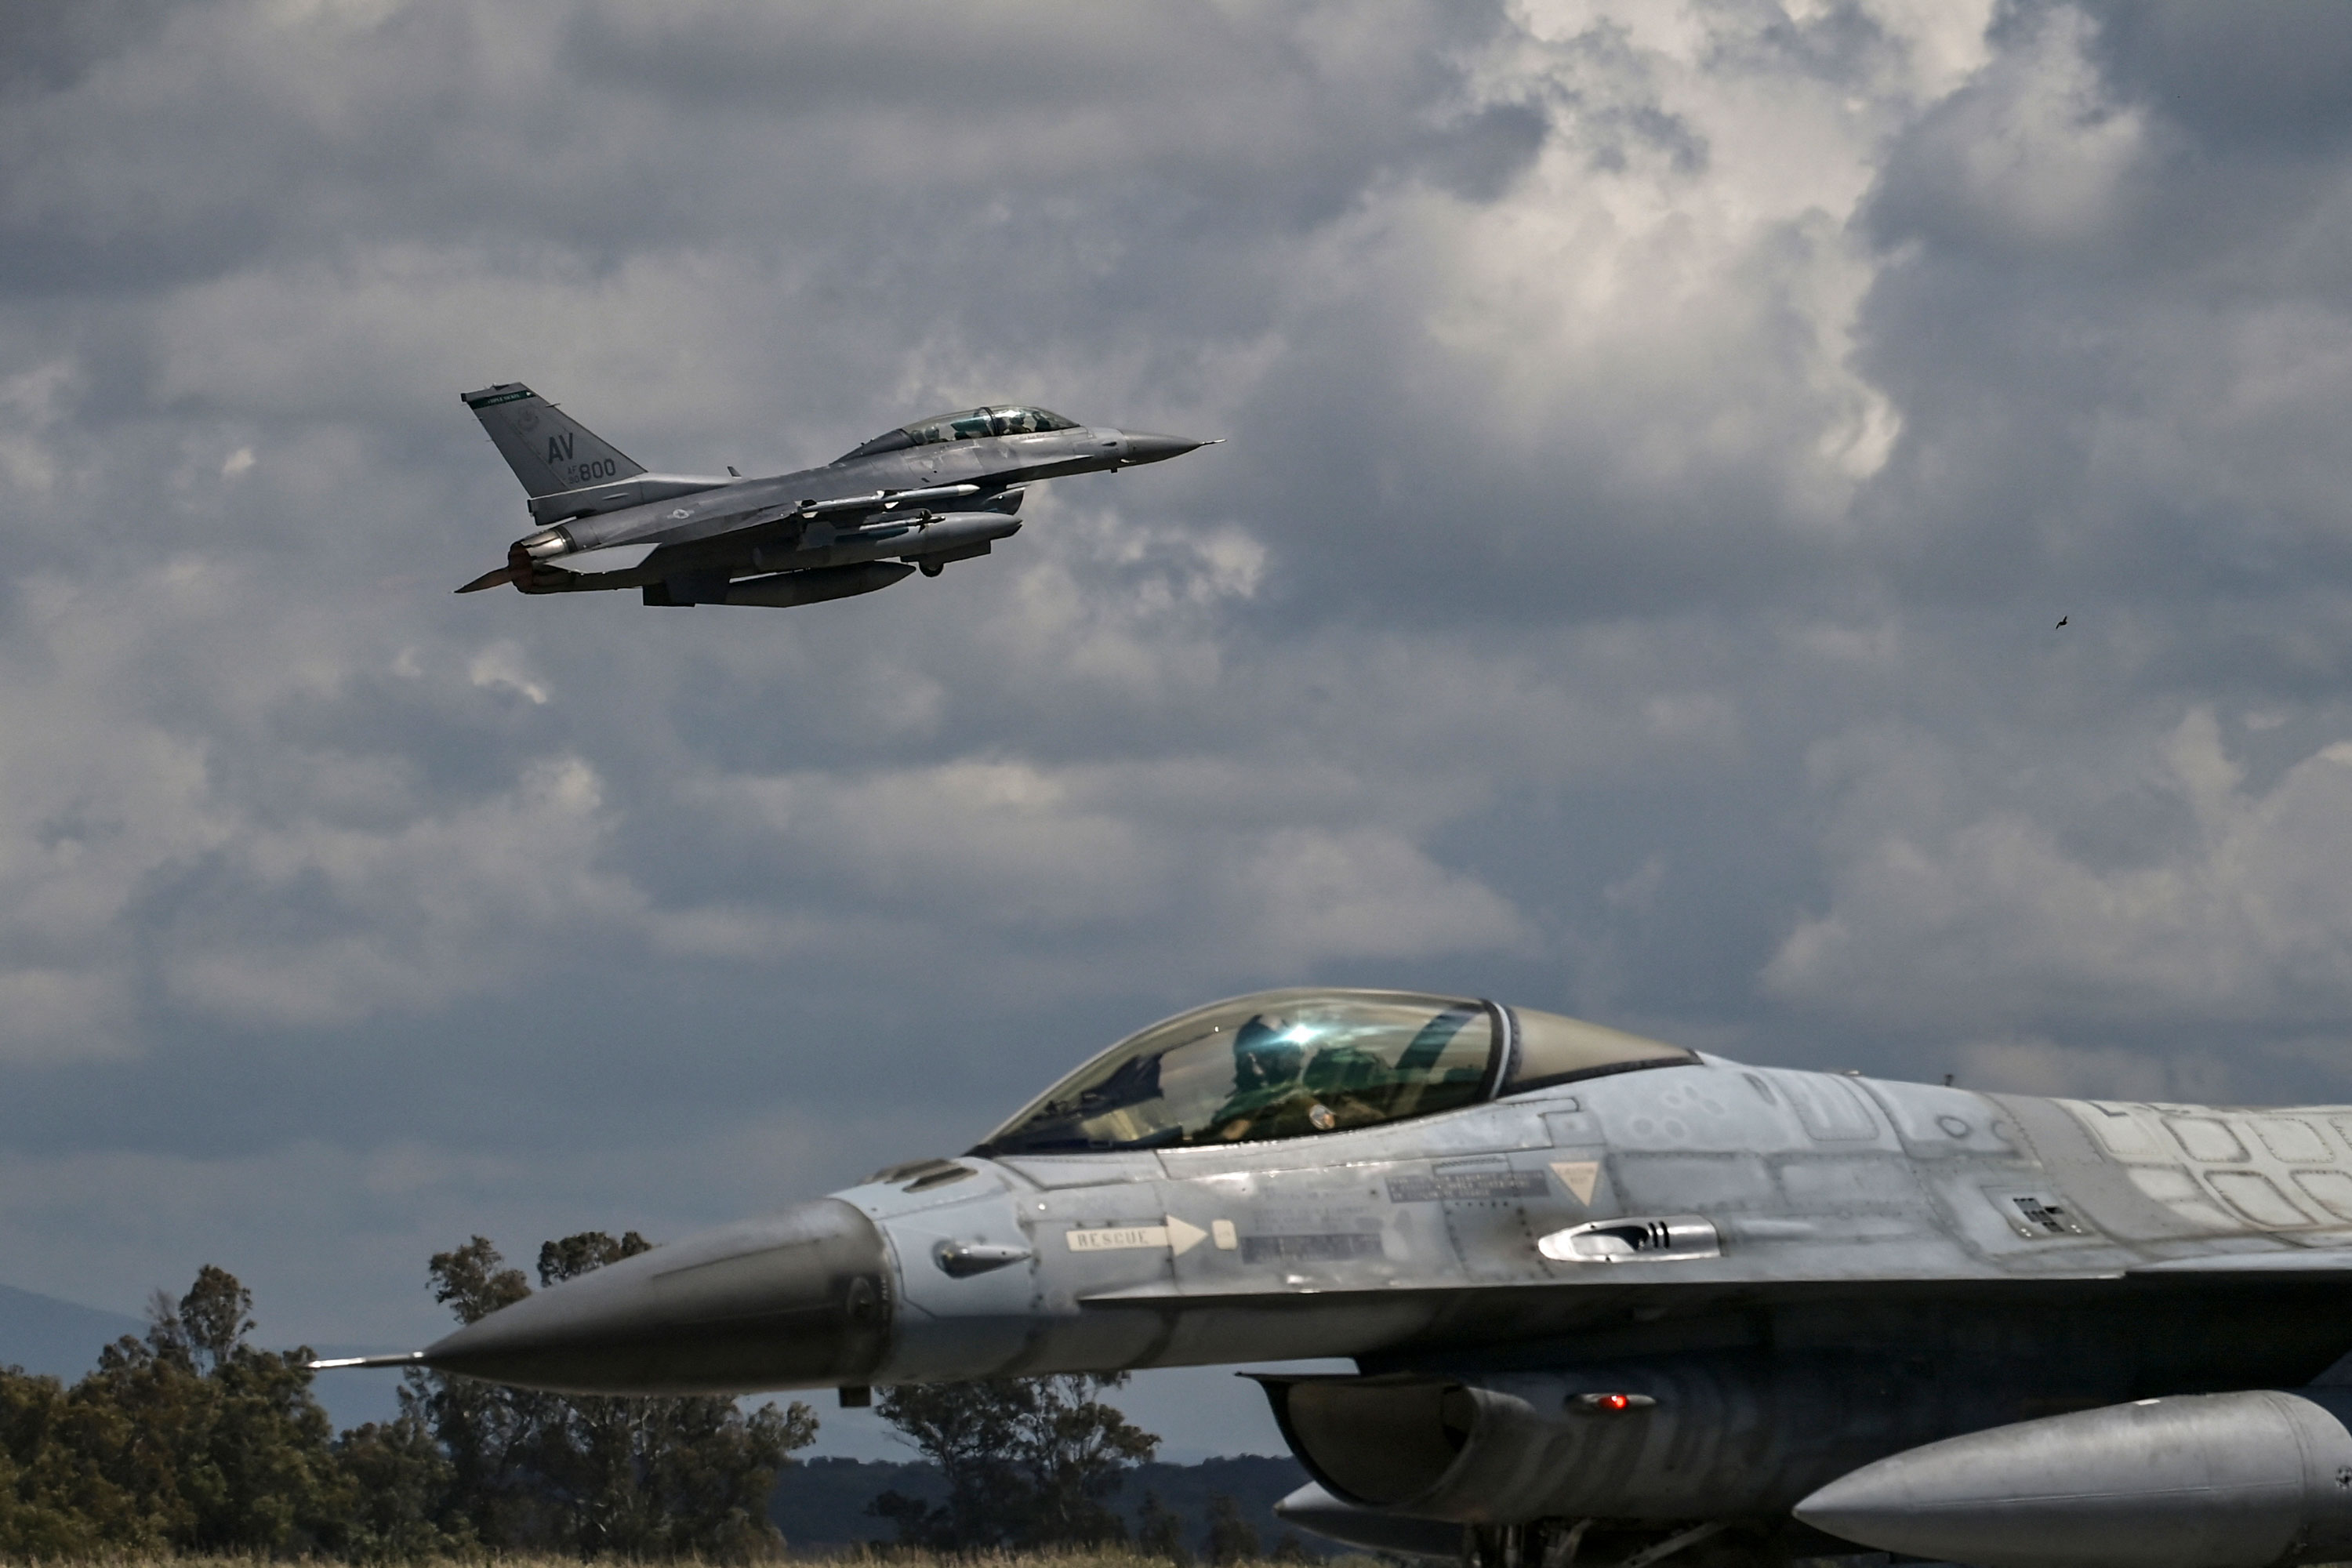 A US Air Force F-16 jet takes off from a military airport in Andravida, Greece, in April 2021.